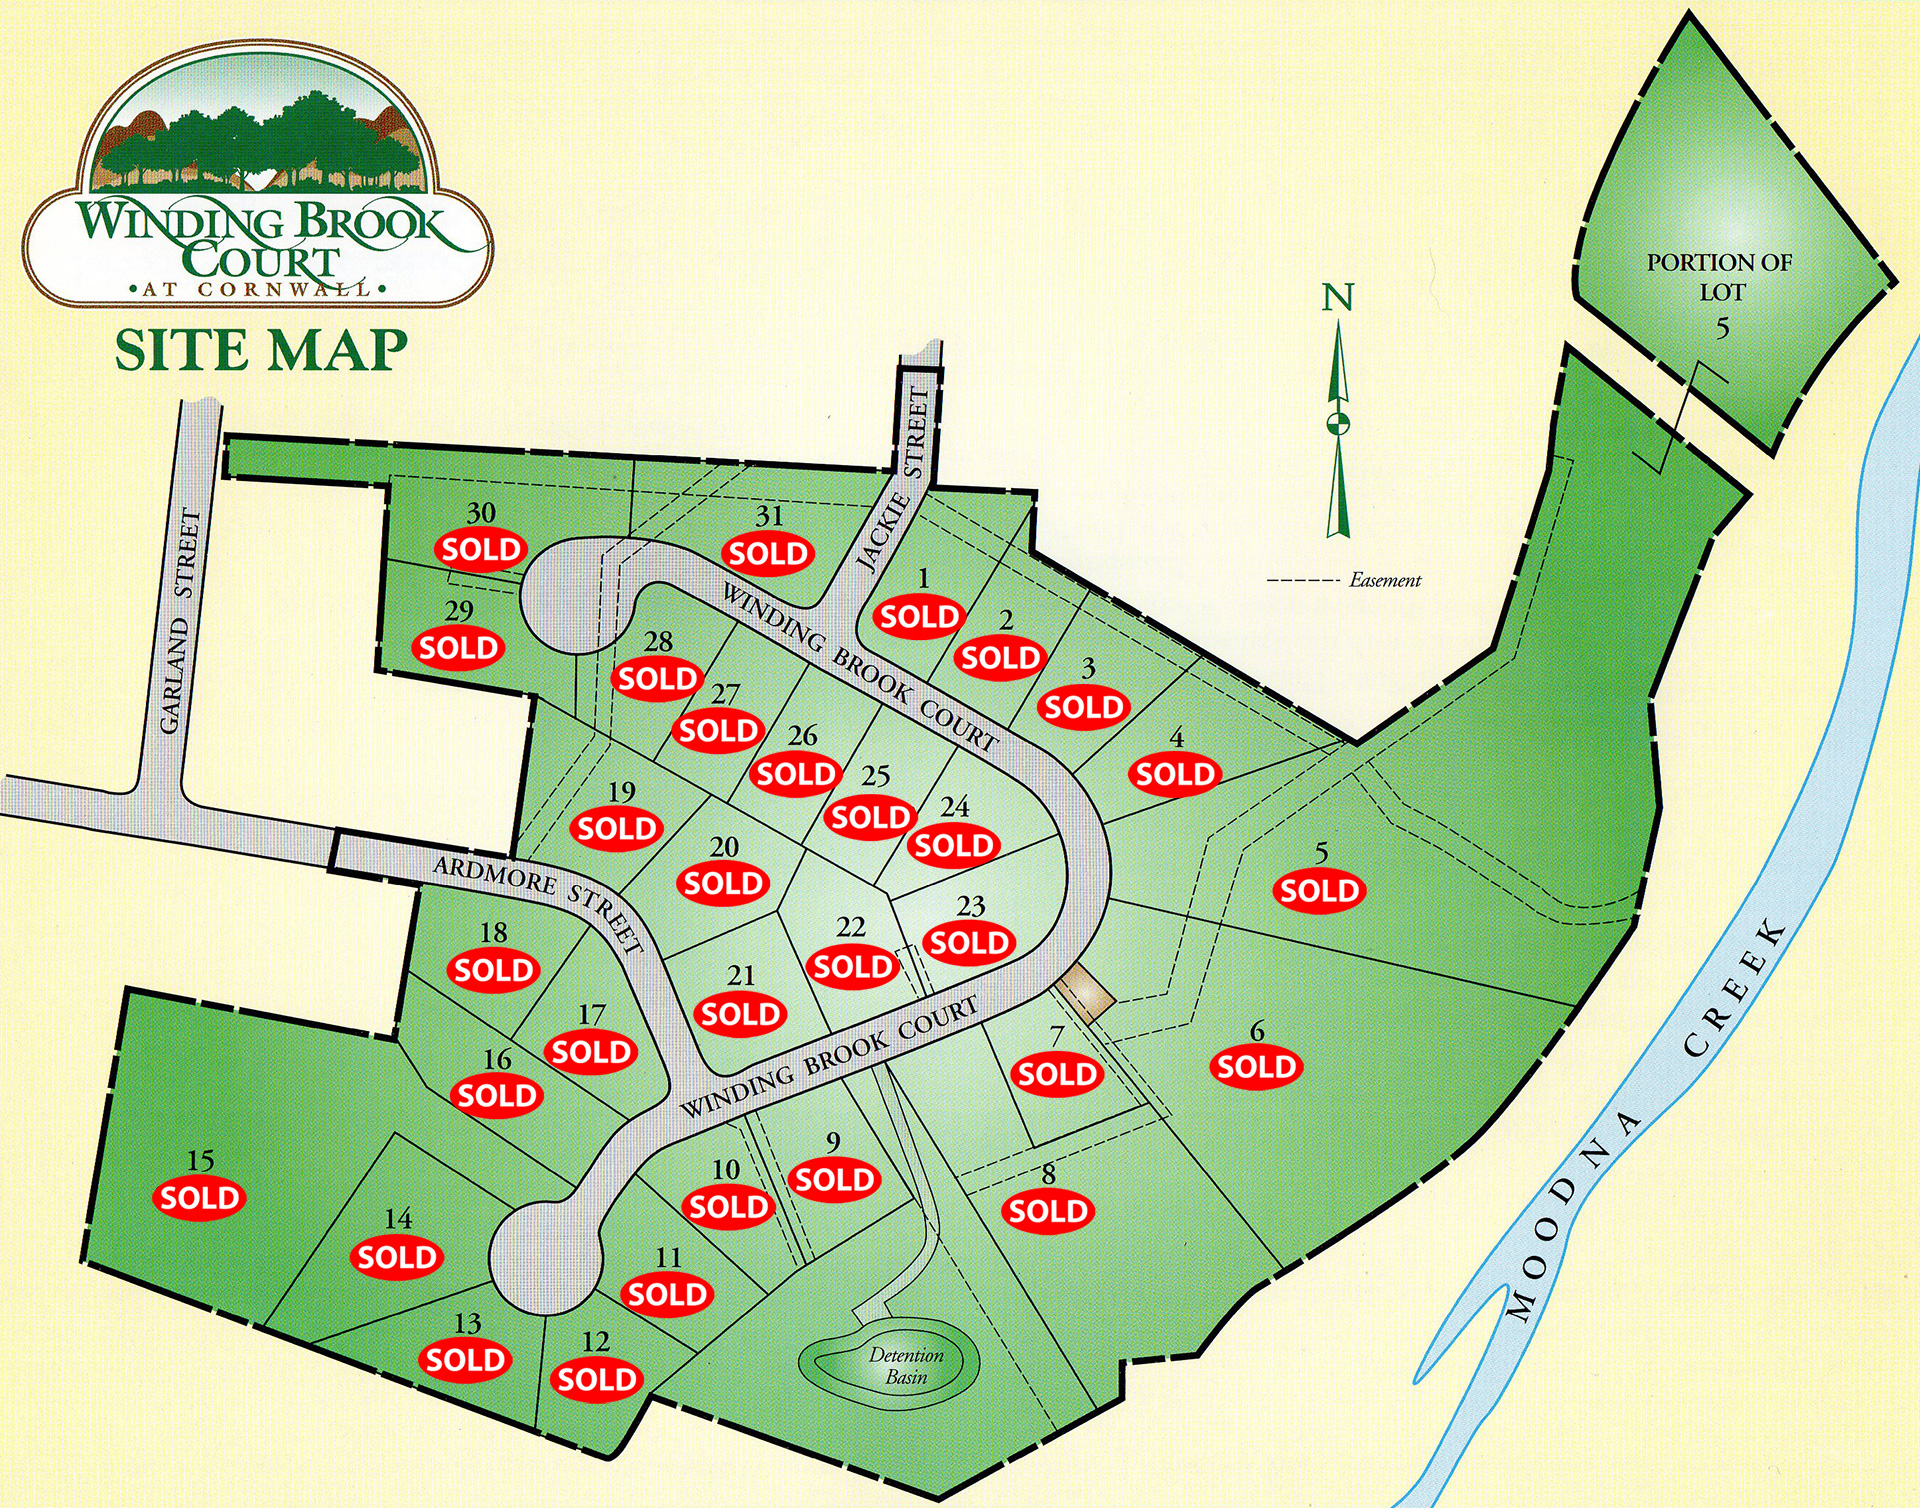 Winding Brook Court Lot Map - New Windsor, NY